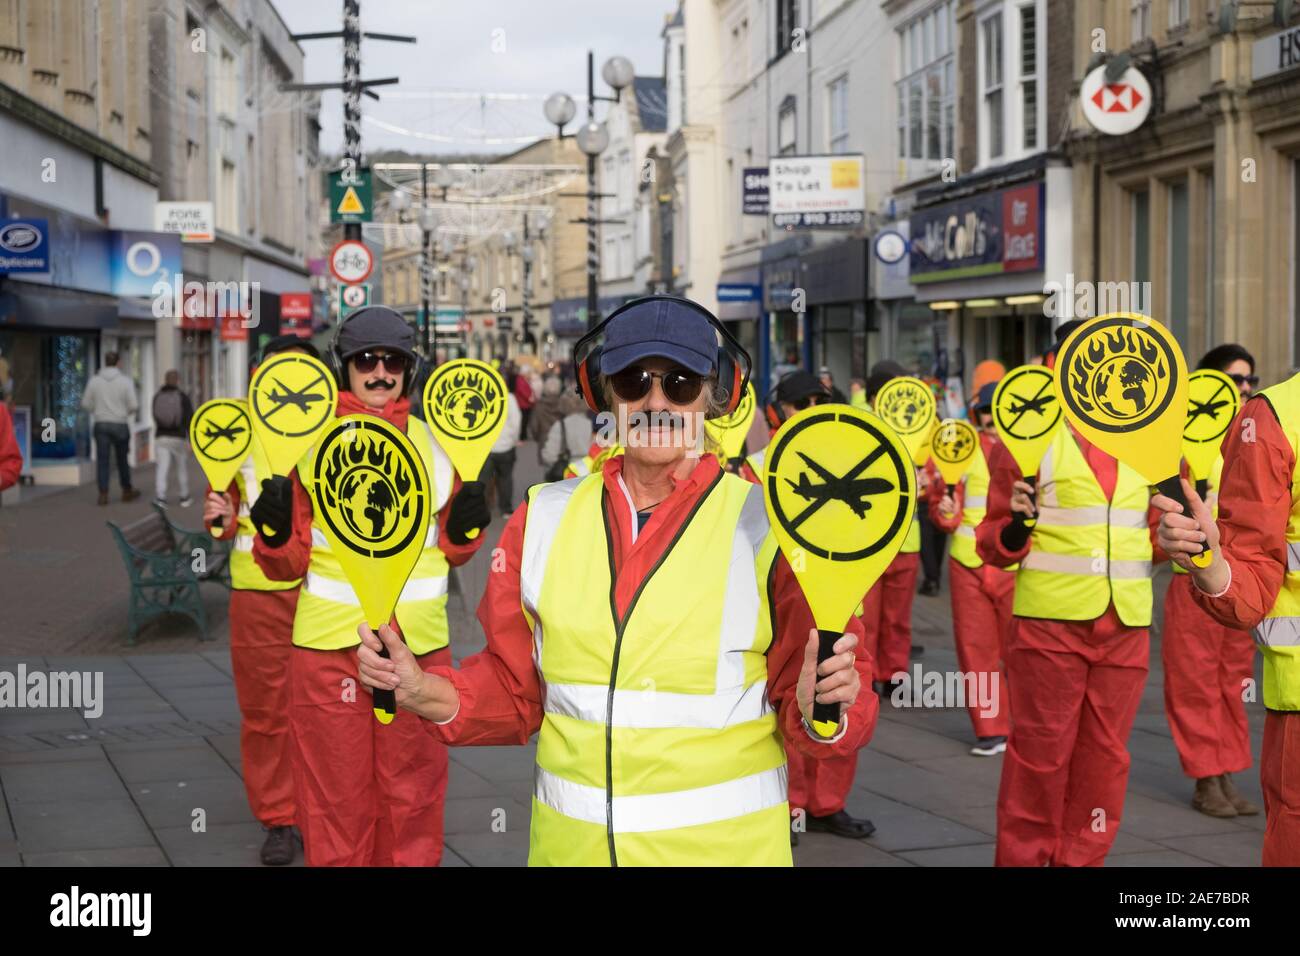 Weston-super-Mare, Somerset, UK, 7th December 2019. The Extinction Rebellion group stage a protest in the town to protest the planned Bristol Airport expansion. Dressed as runway directors with bats and false moustaches the group made a silent protest on the High Street. Local activists are concerned about the ecological impact of the expansion plans for Bristol Airport. Credit: Mr Standfast/Alamy Live News Stock Photo